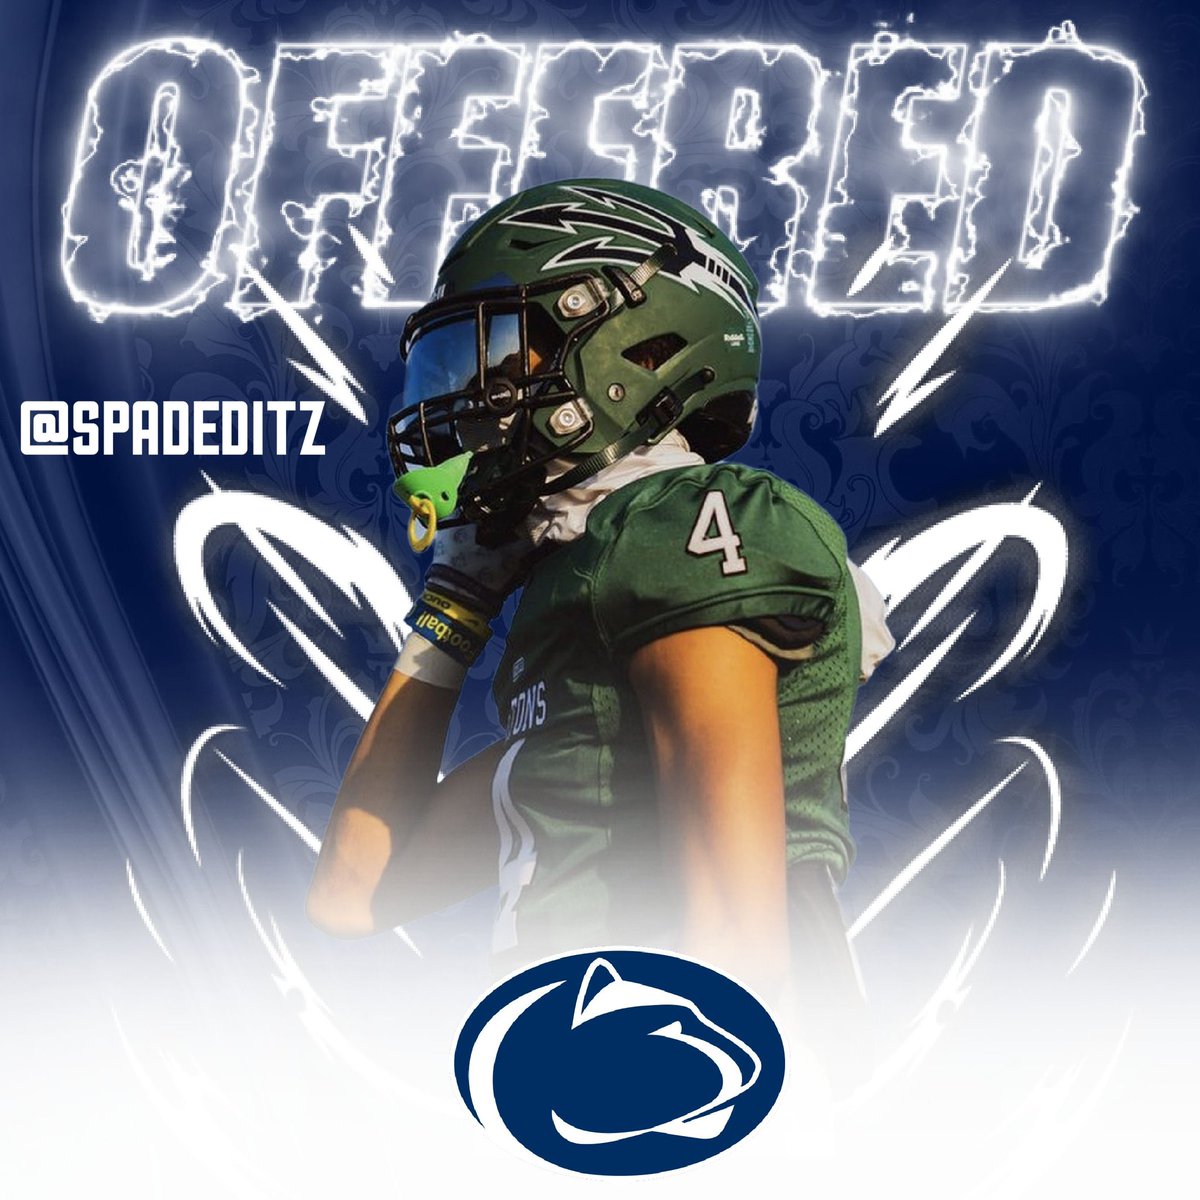 3⭐️ ATH Dayton Aupiu (@aupiu45) has been offered by the Penn State! #pennstate🦁